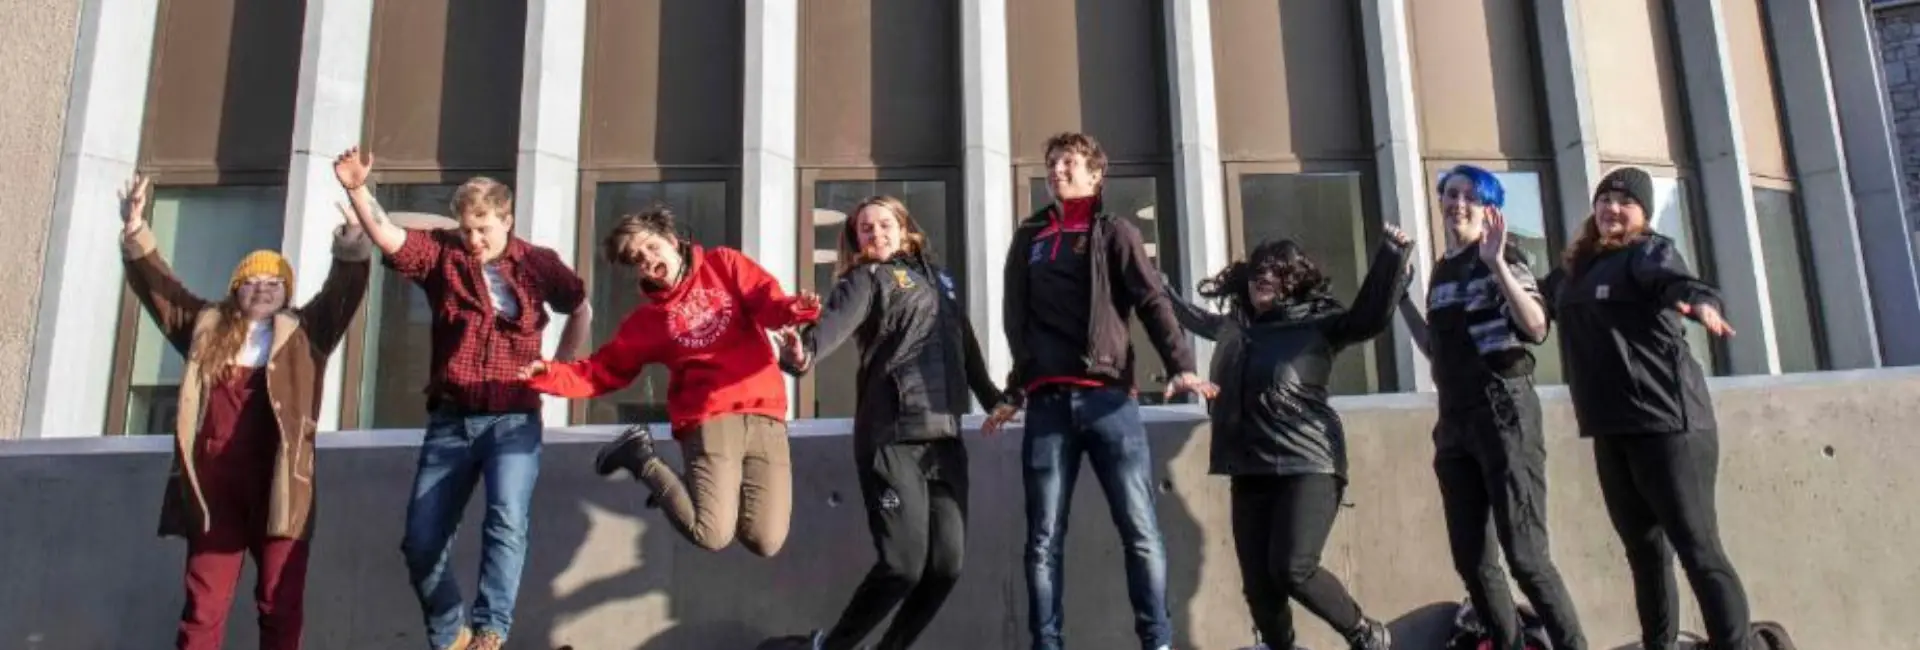 A group of students jumping in celebration